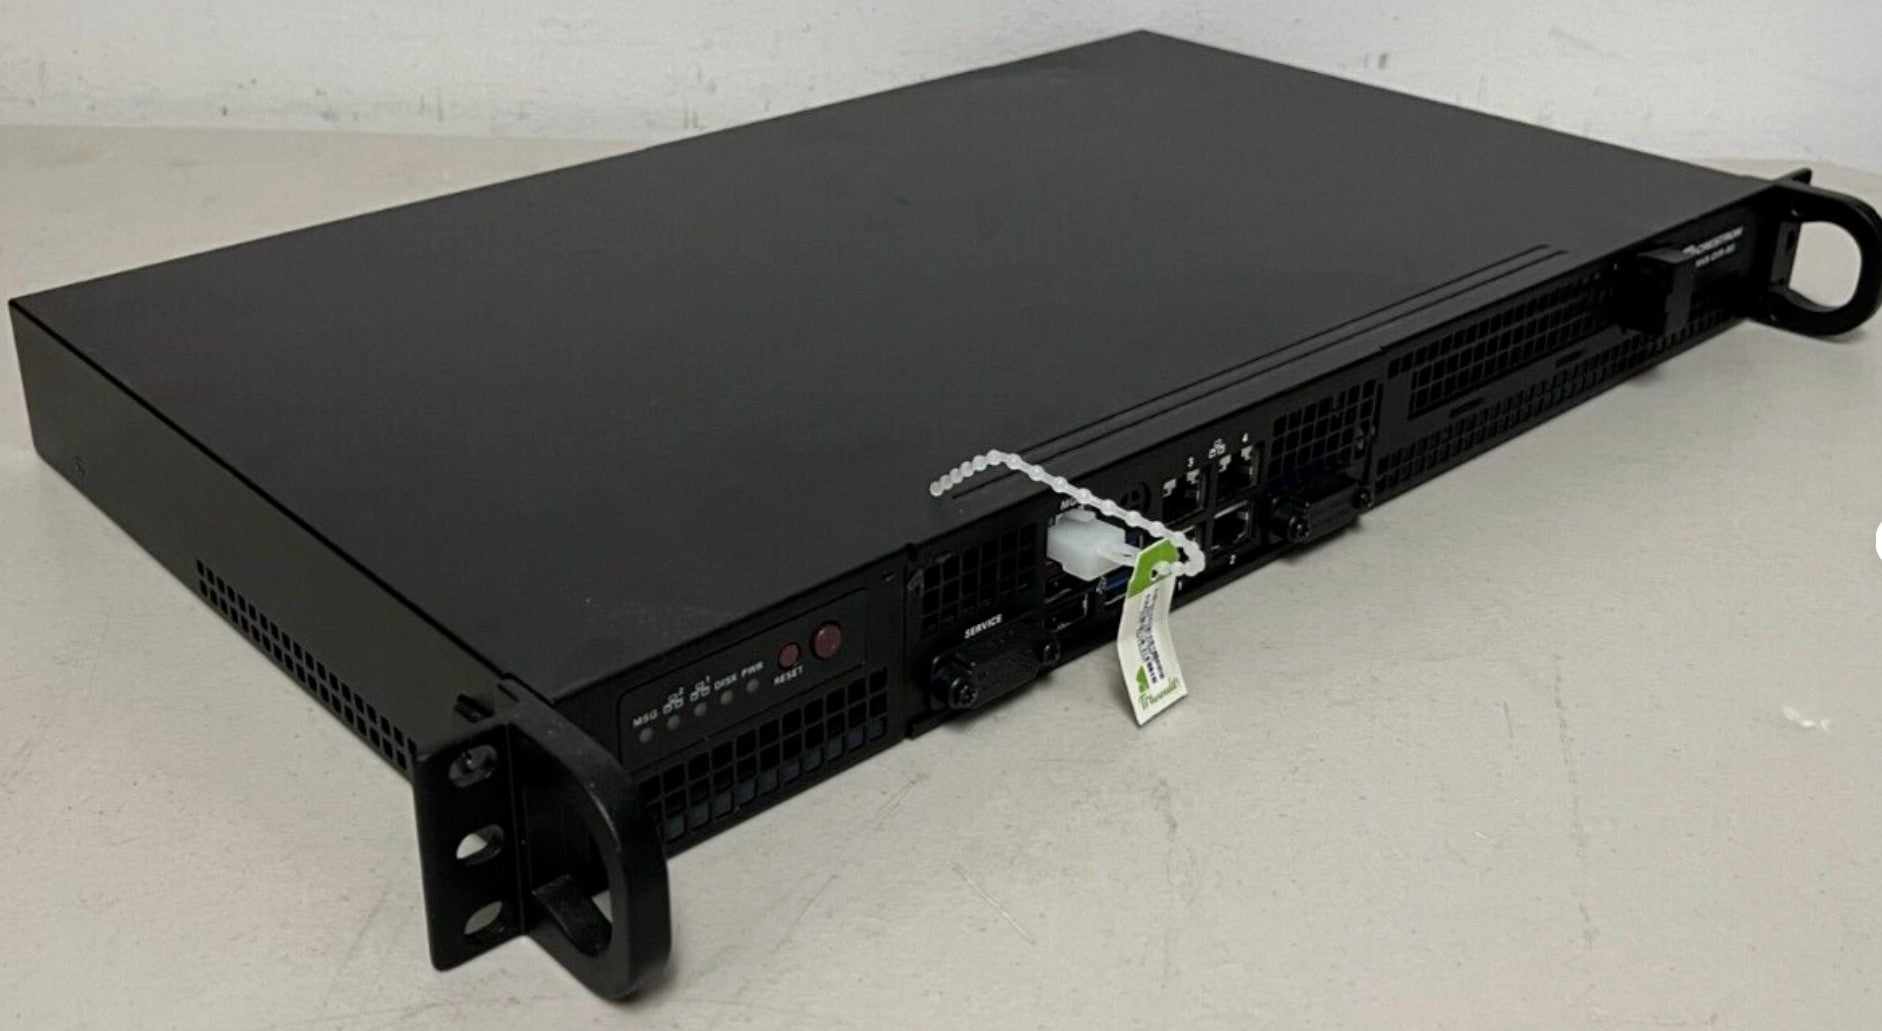 New Crestron DM-NVX-DIR-80, Virtual Switching Appliance for Sale. We Sell Professional Audio Equipment. Audio Systems, Amplifiers, Consoles, Mixers, Electronics, Entertainment, Sound, Live.